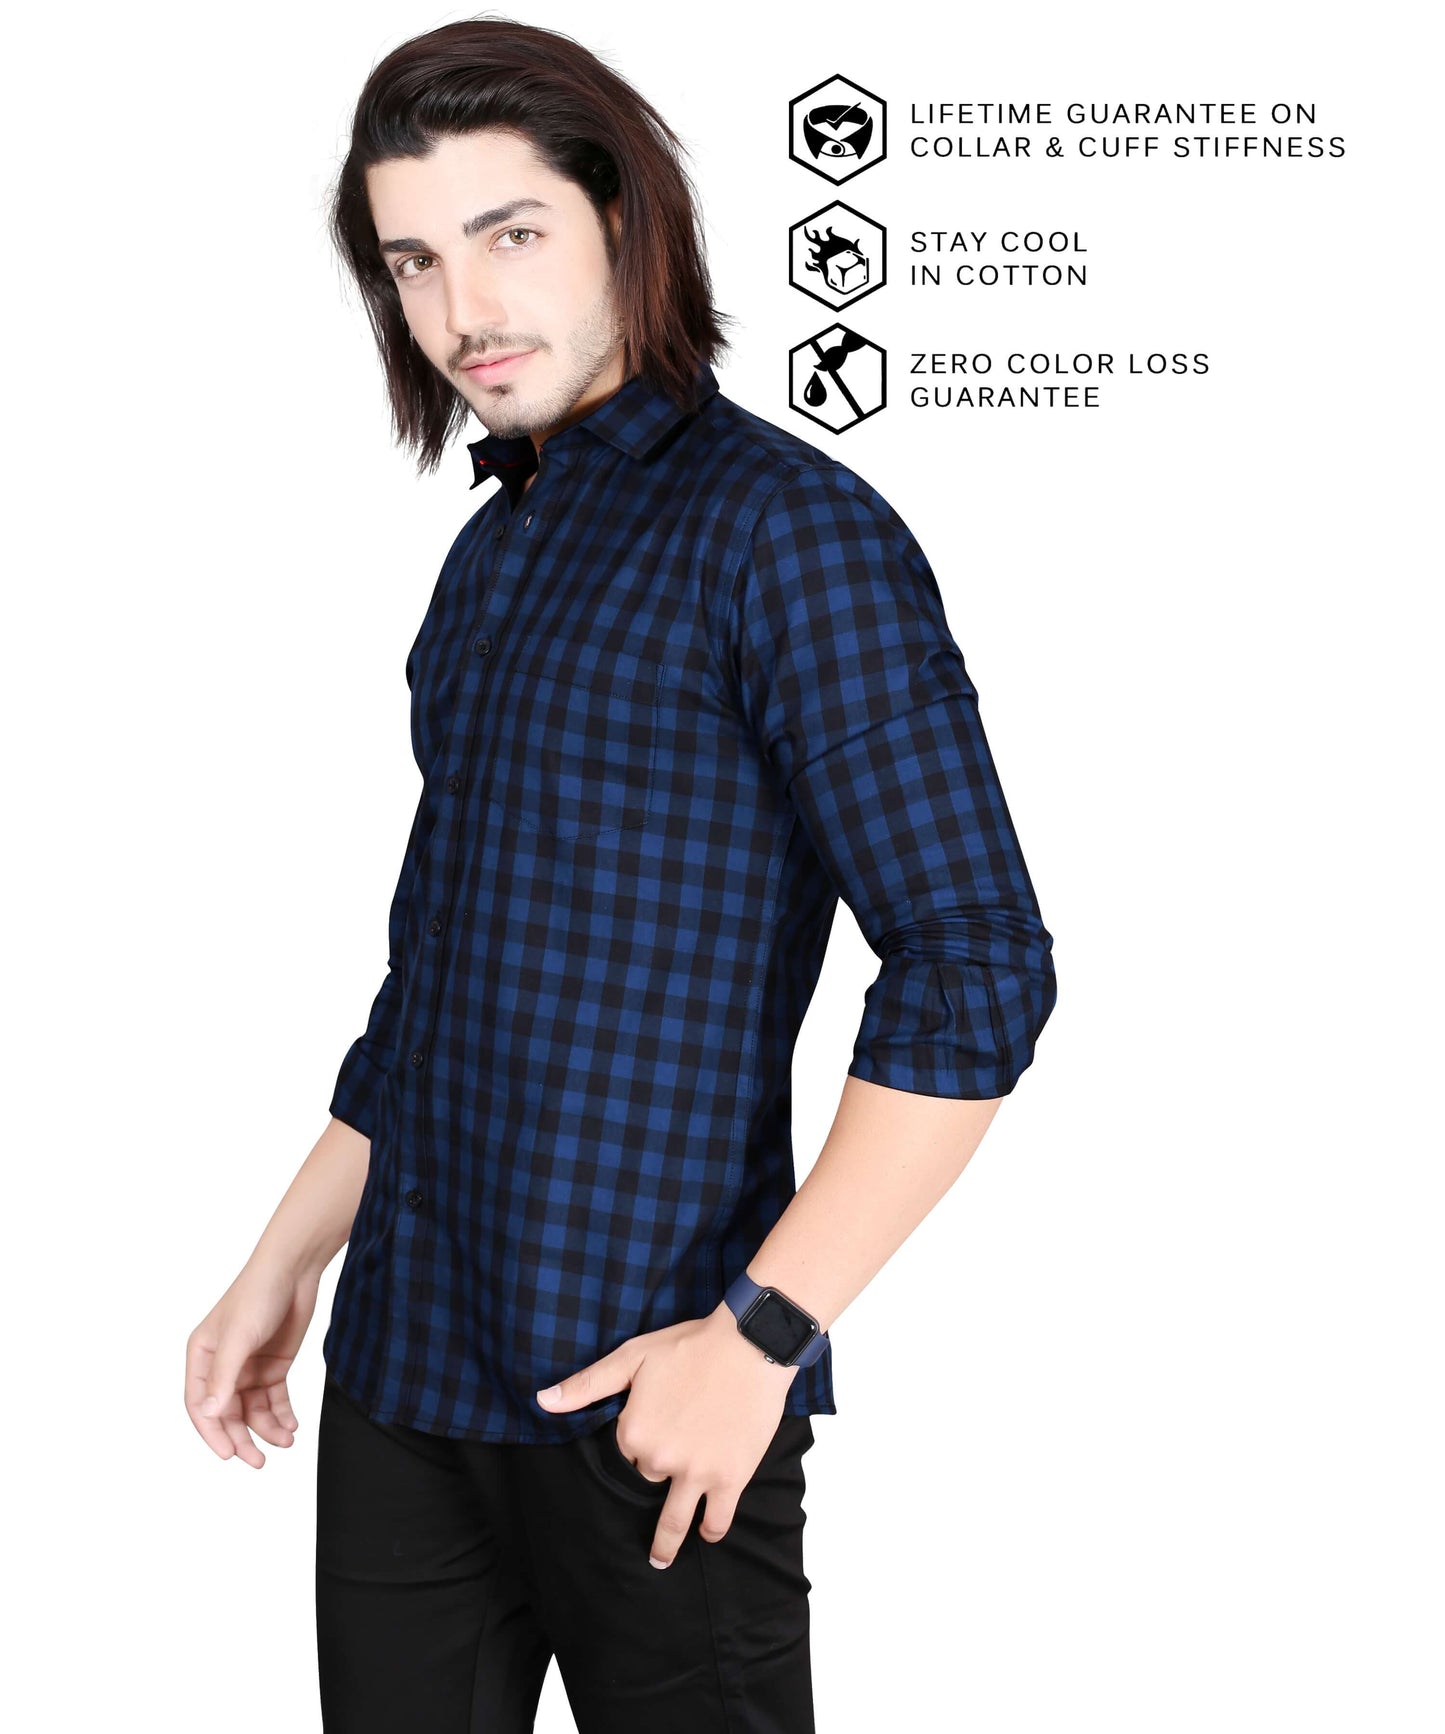 5thanfold Men's Casual Pure Cotton Full Sleeve Checkered Dark Blue Slim Fit Shirt